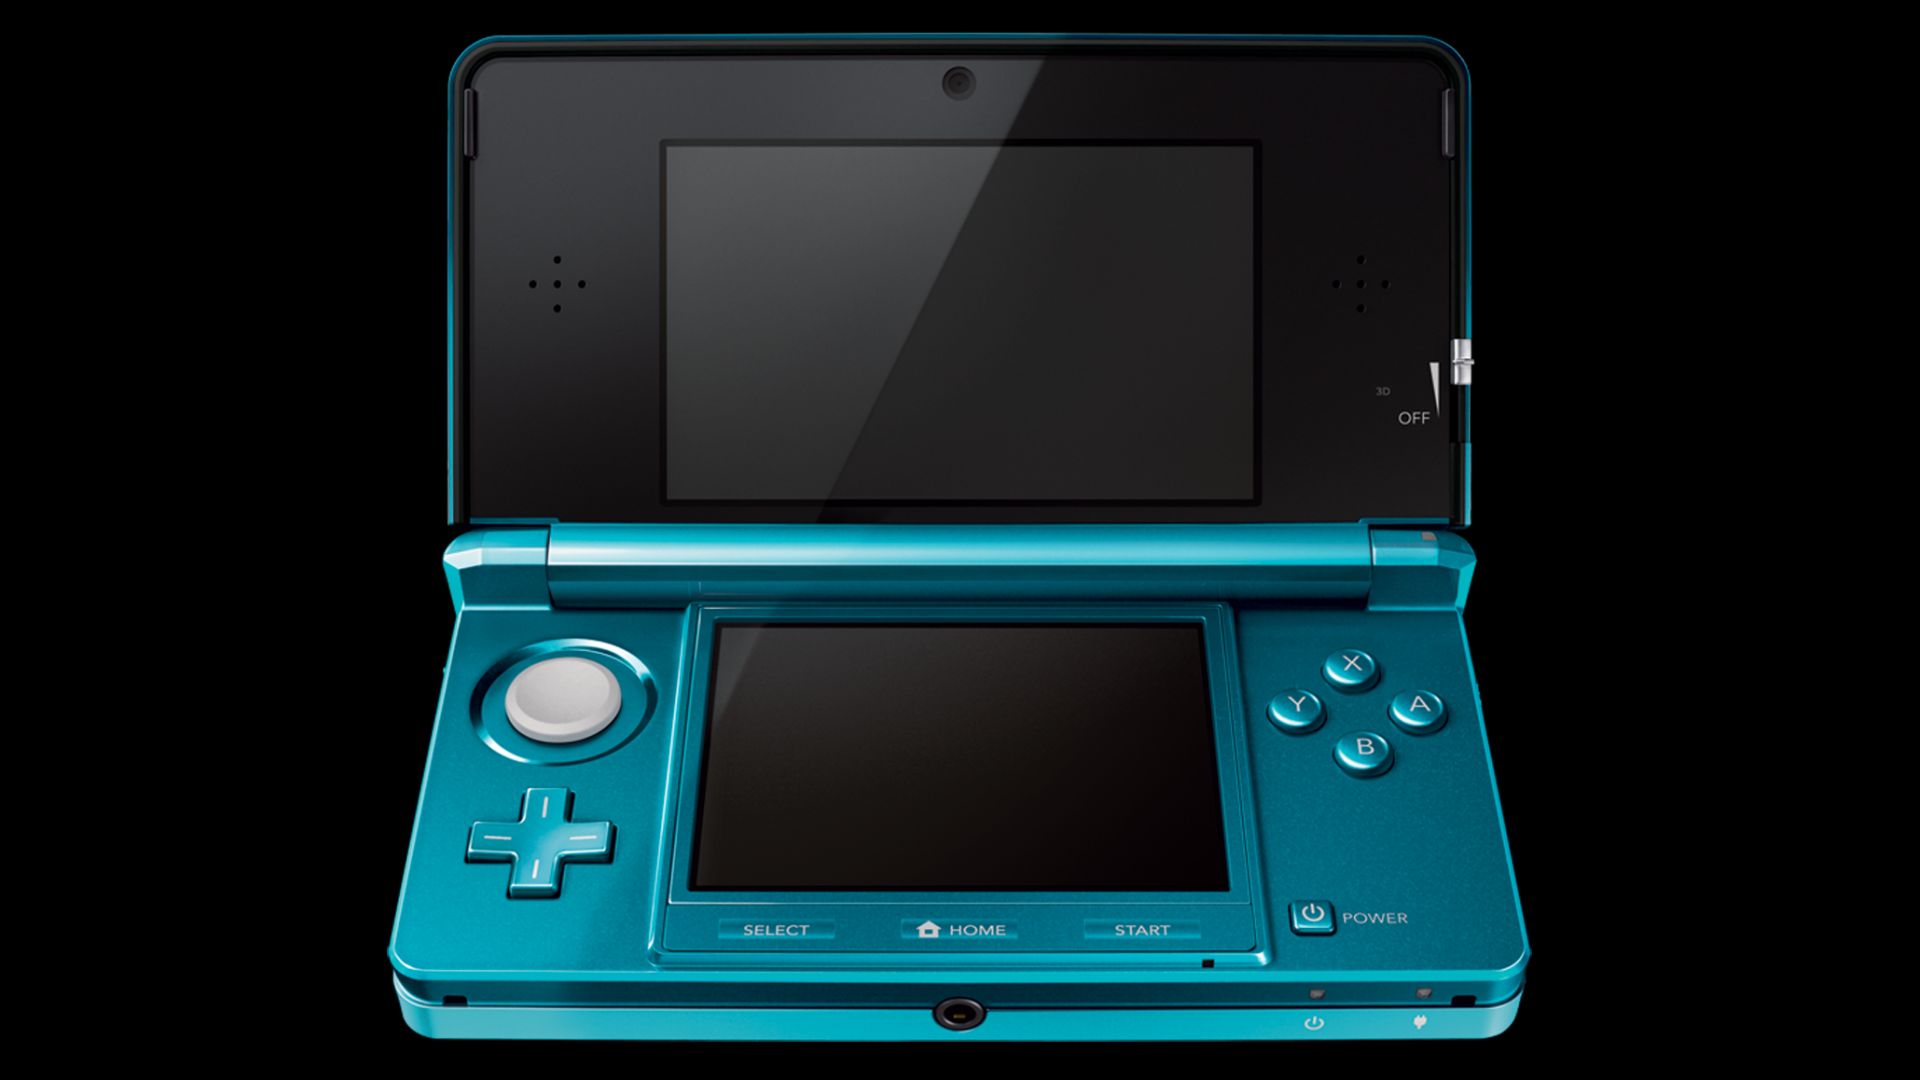 Generic Nintendo 3ds Blue Home Theater Backdrops Wallpaper